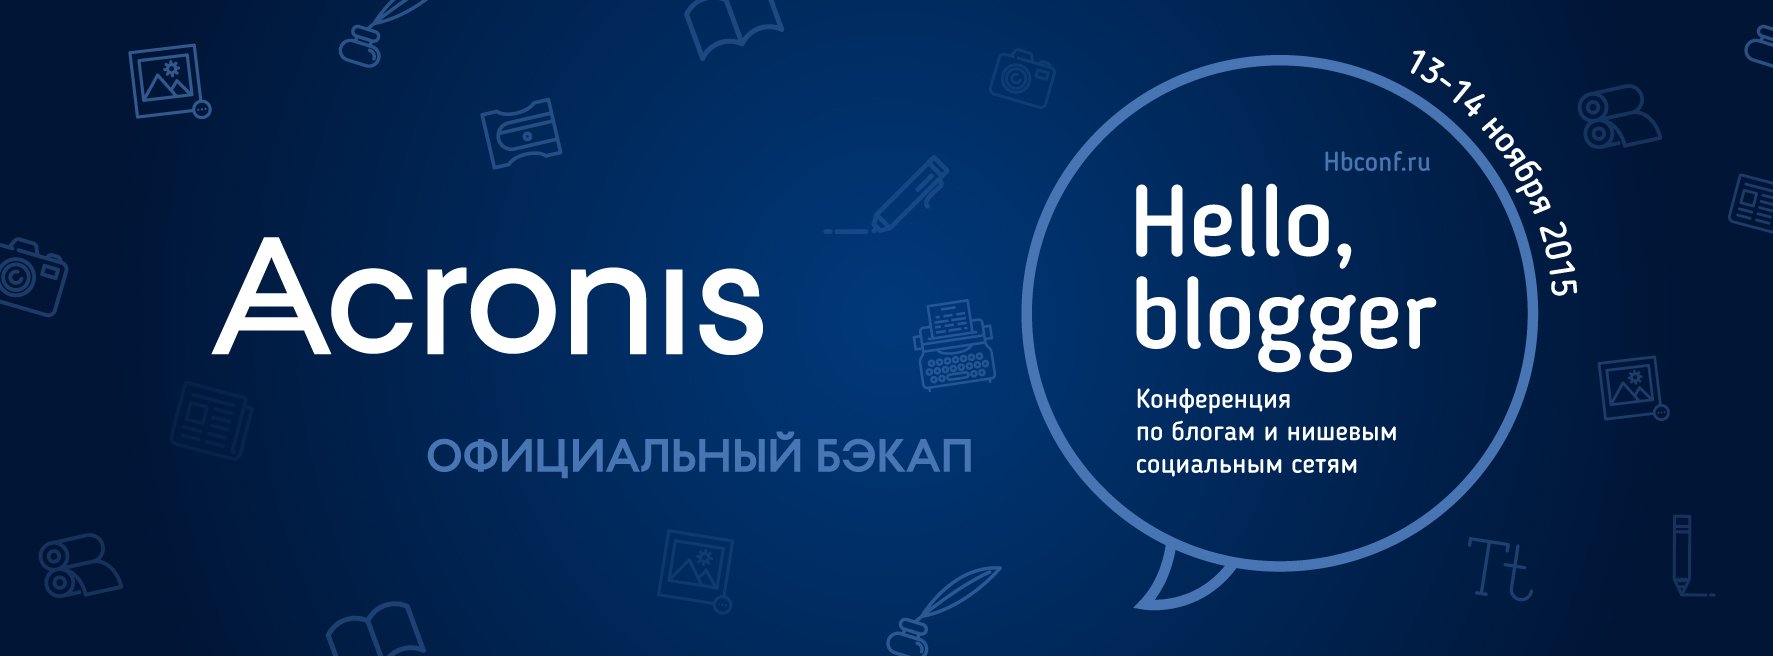 Acronis cover